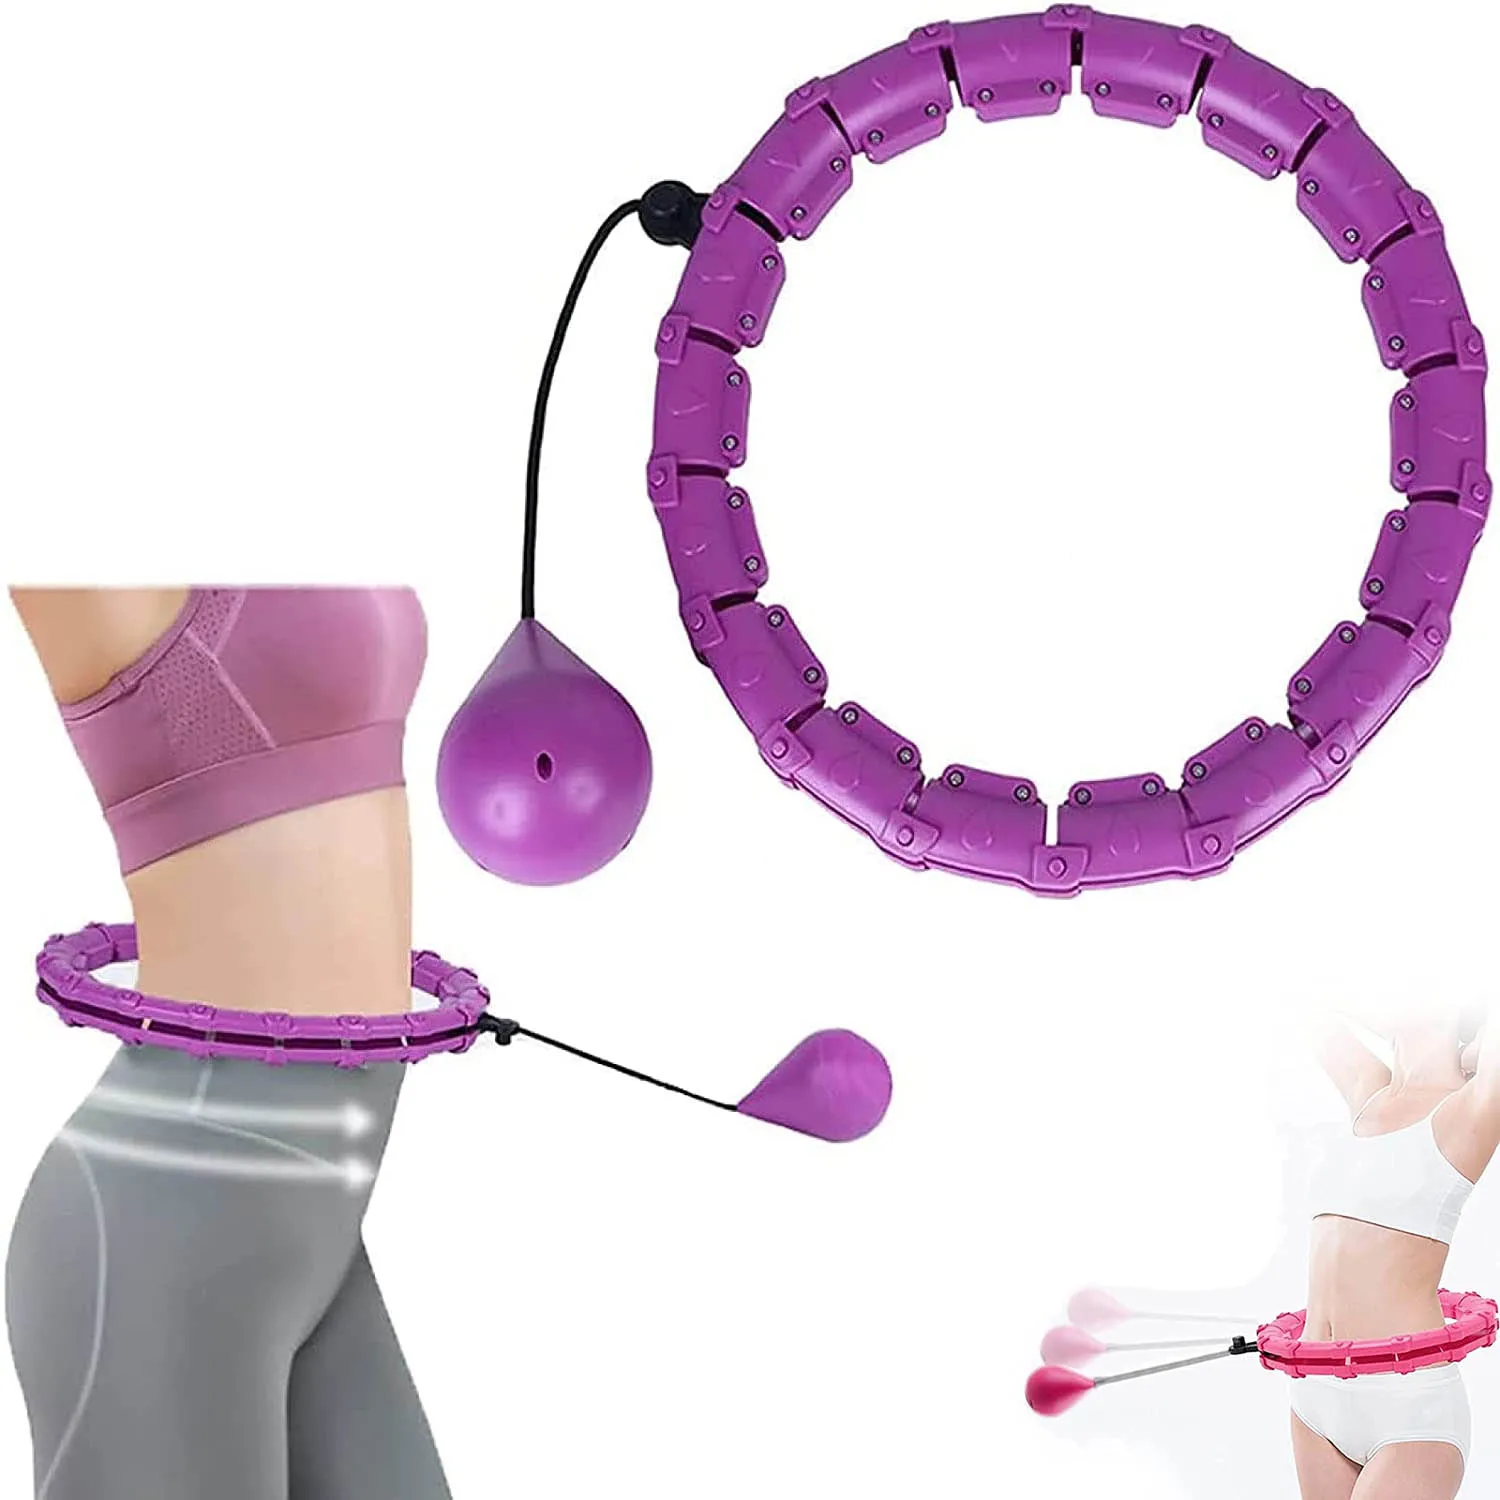 24 Detachable Knots Adjustable Weight Auto-Spinning Ball for Adults/Kids/Home Workout 2 in 1 Fitness Weight Loss and Massage Detachable Weighted Smart Hula Hoop Abdomen Fitness Equipment 